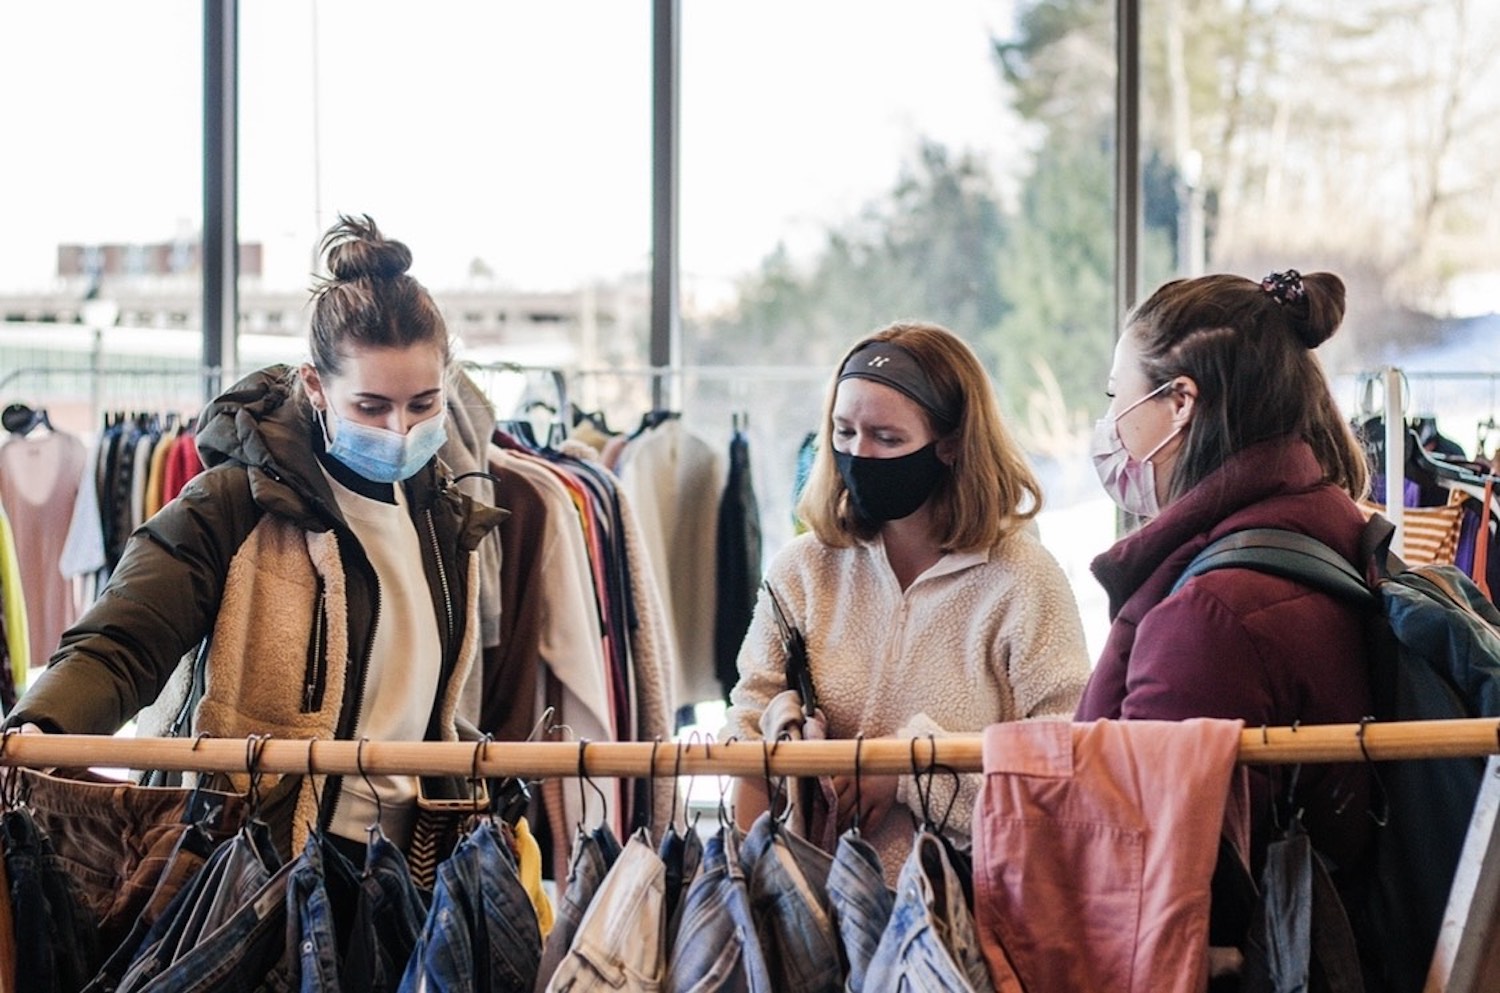 31 Sustainable Fashion Brands to Shop in 2022